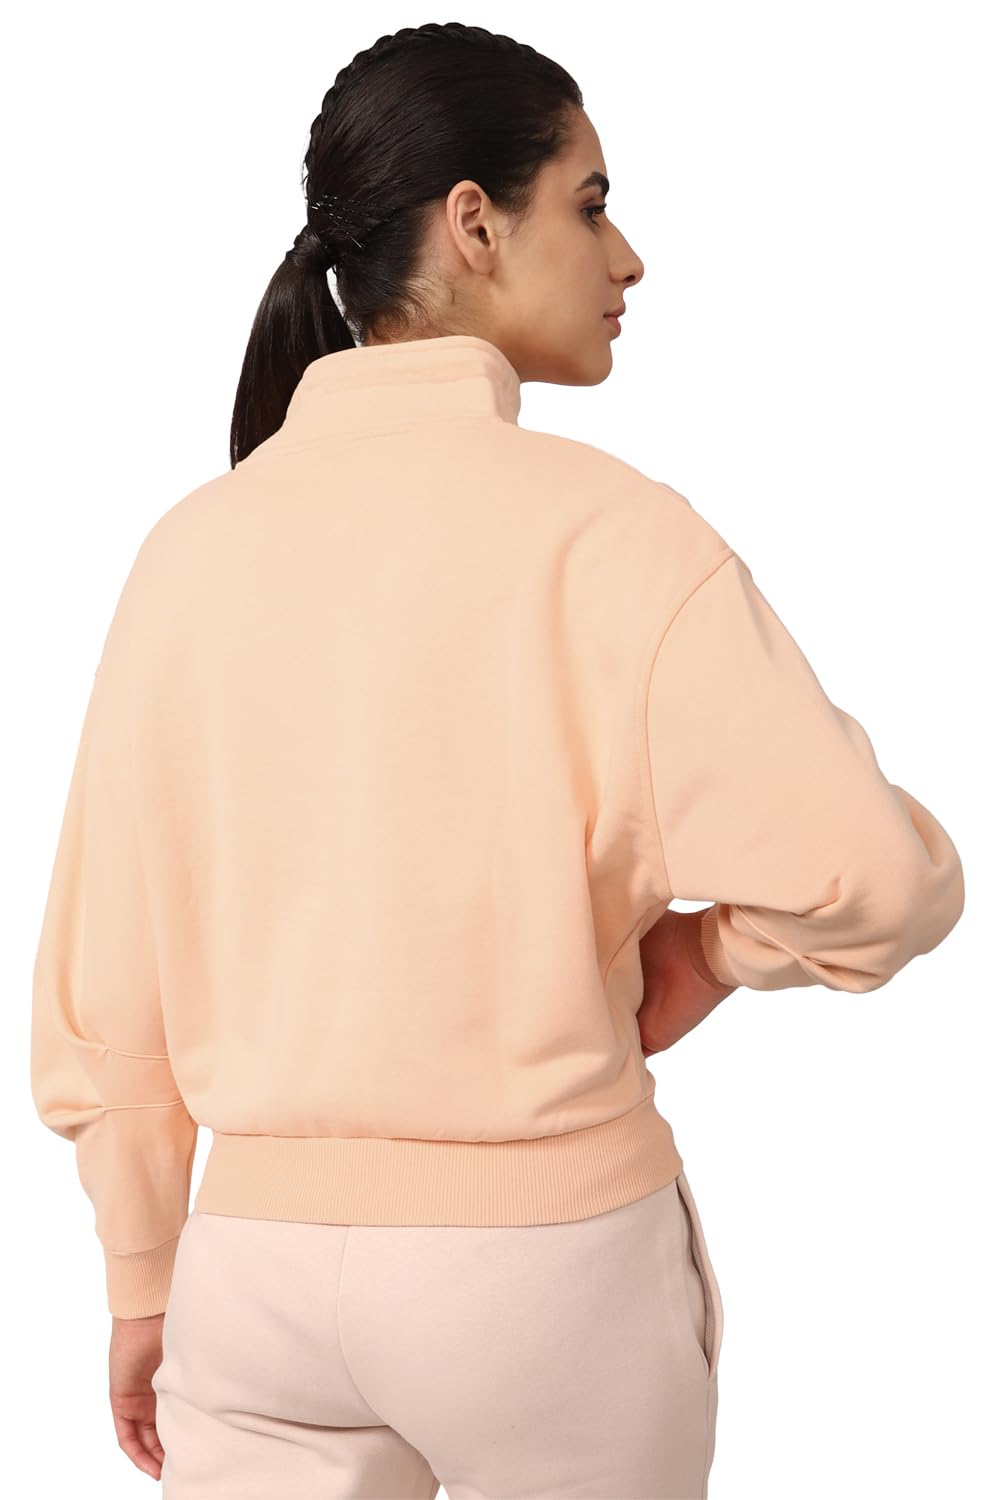 Reebok Womens CL WDE Cotton FT Coverup Peach